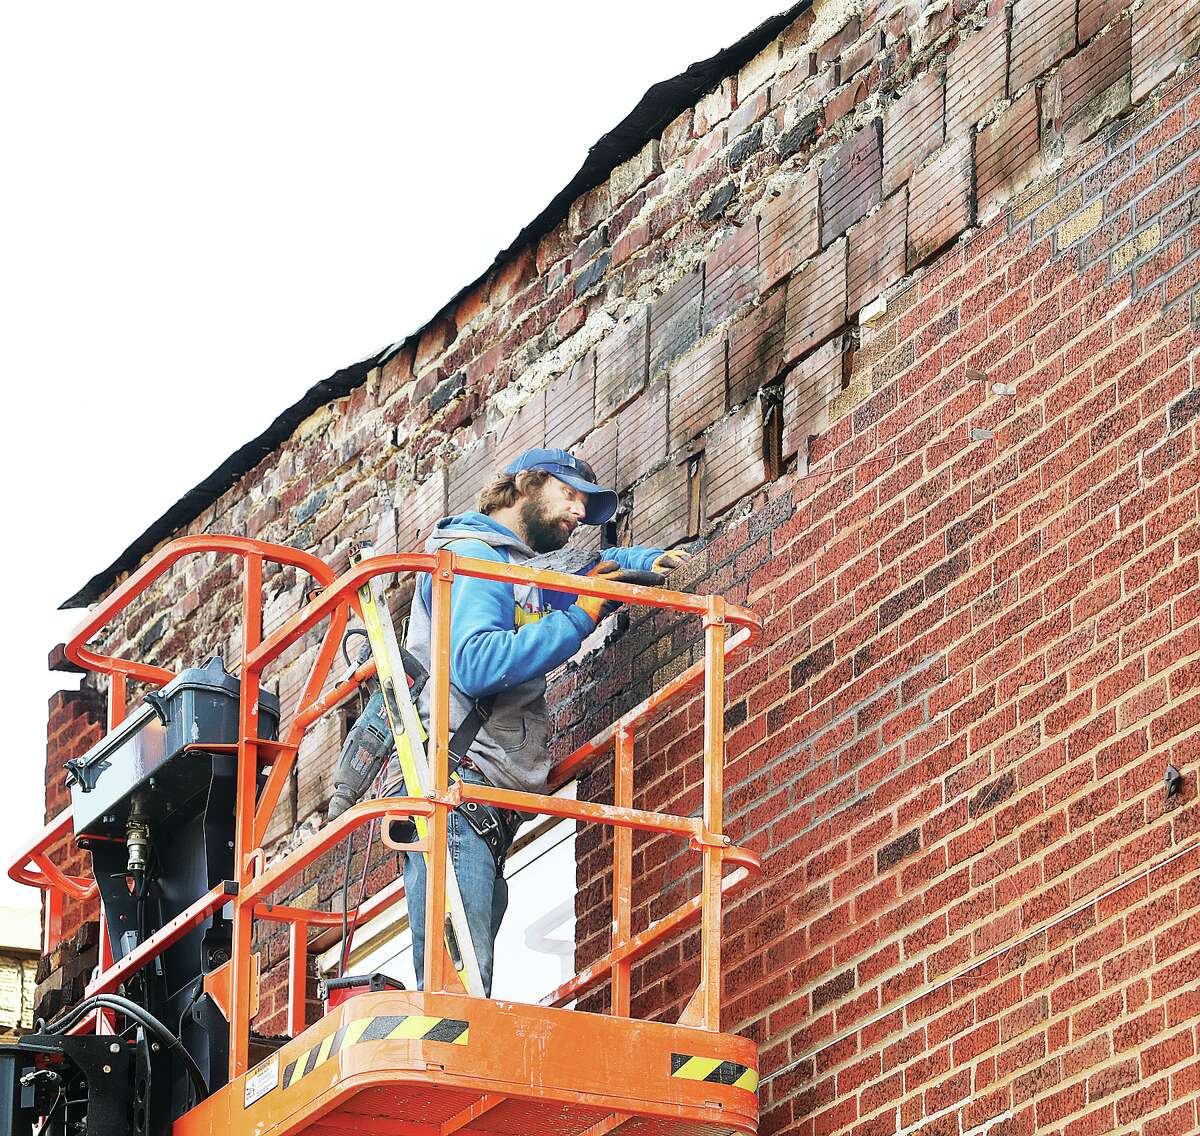 Workers in downtown Wood River this week were carefully replacing the loose bricks they removed from the front of the building that houses Cleary's Shoes & Boots, 48 E. Ferguson Ave. in Wood River. Workers have done similar work to other nearby downtown buildings where the bricks were almost falling off. The work should keep the old storefront secure for decades to come.